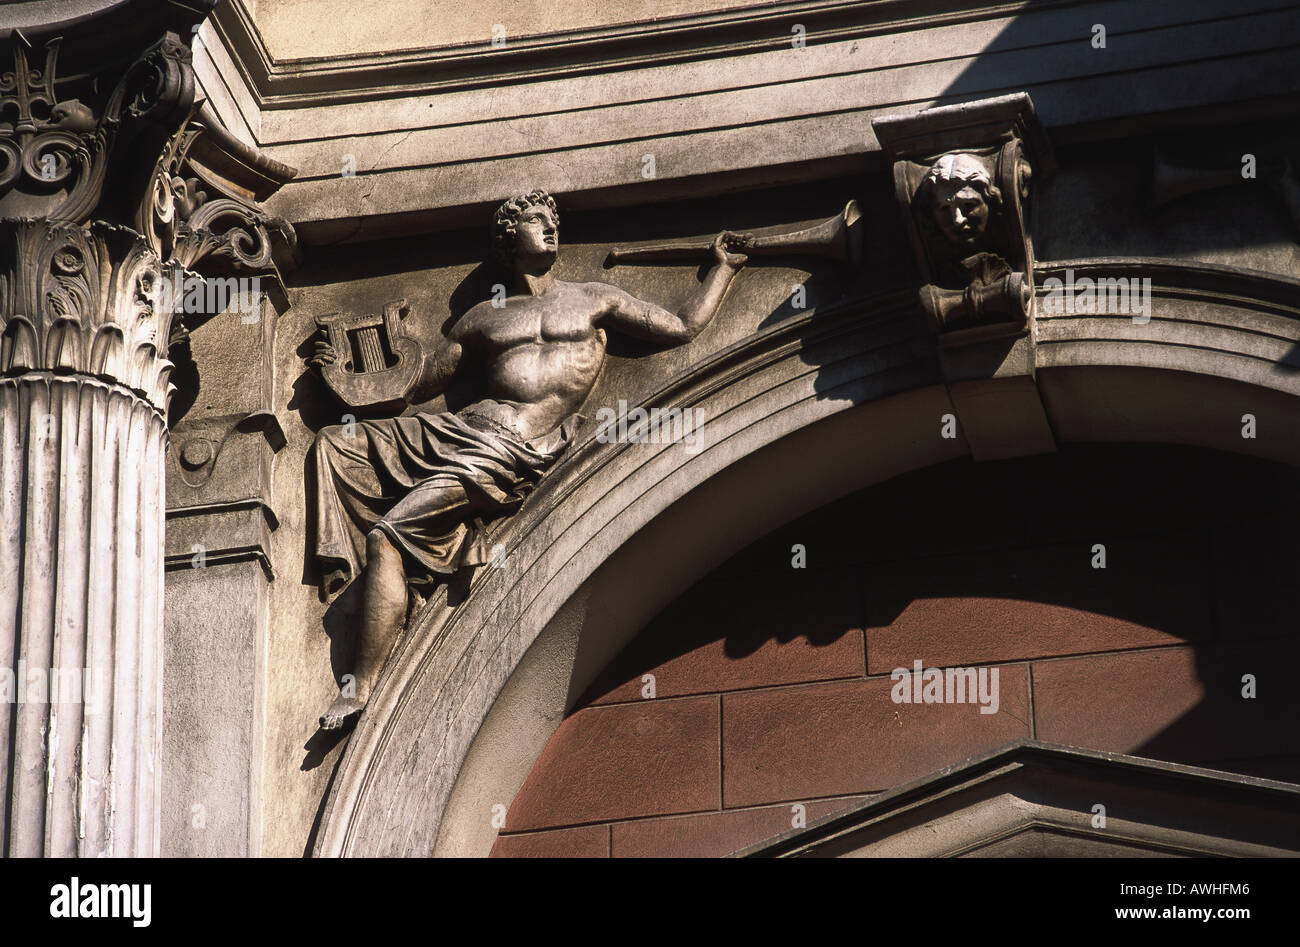 Greece, Athens, Aghiou Konstantinou, National Theater, carved stone ornamental mouldings above pediment Stock Photo